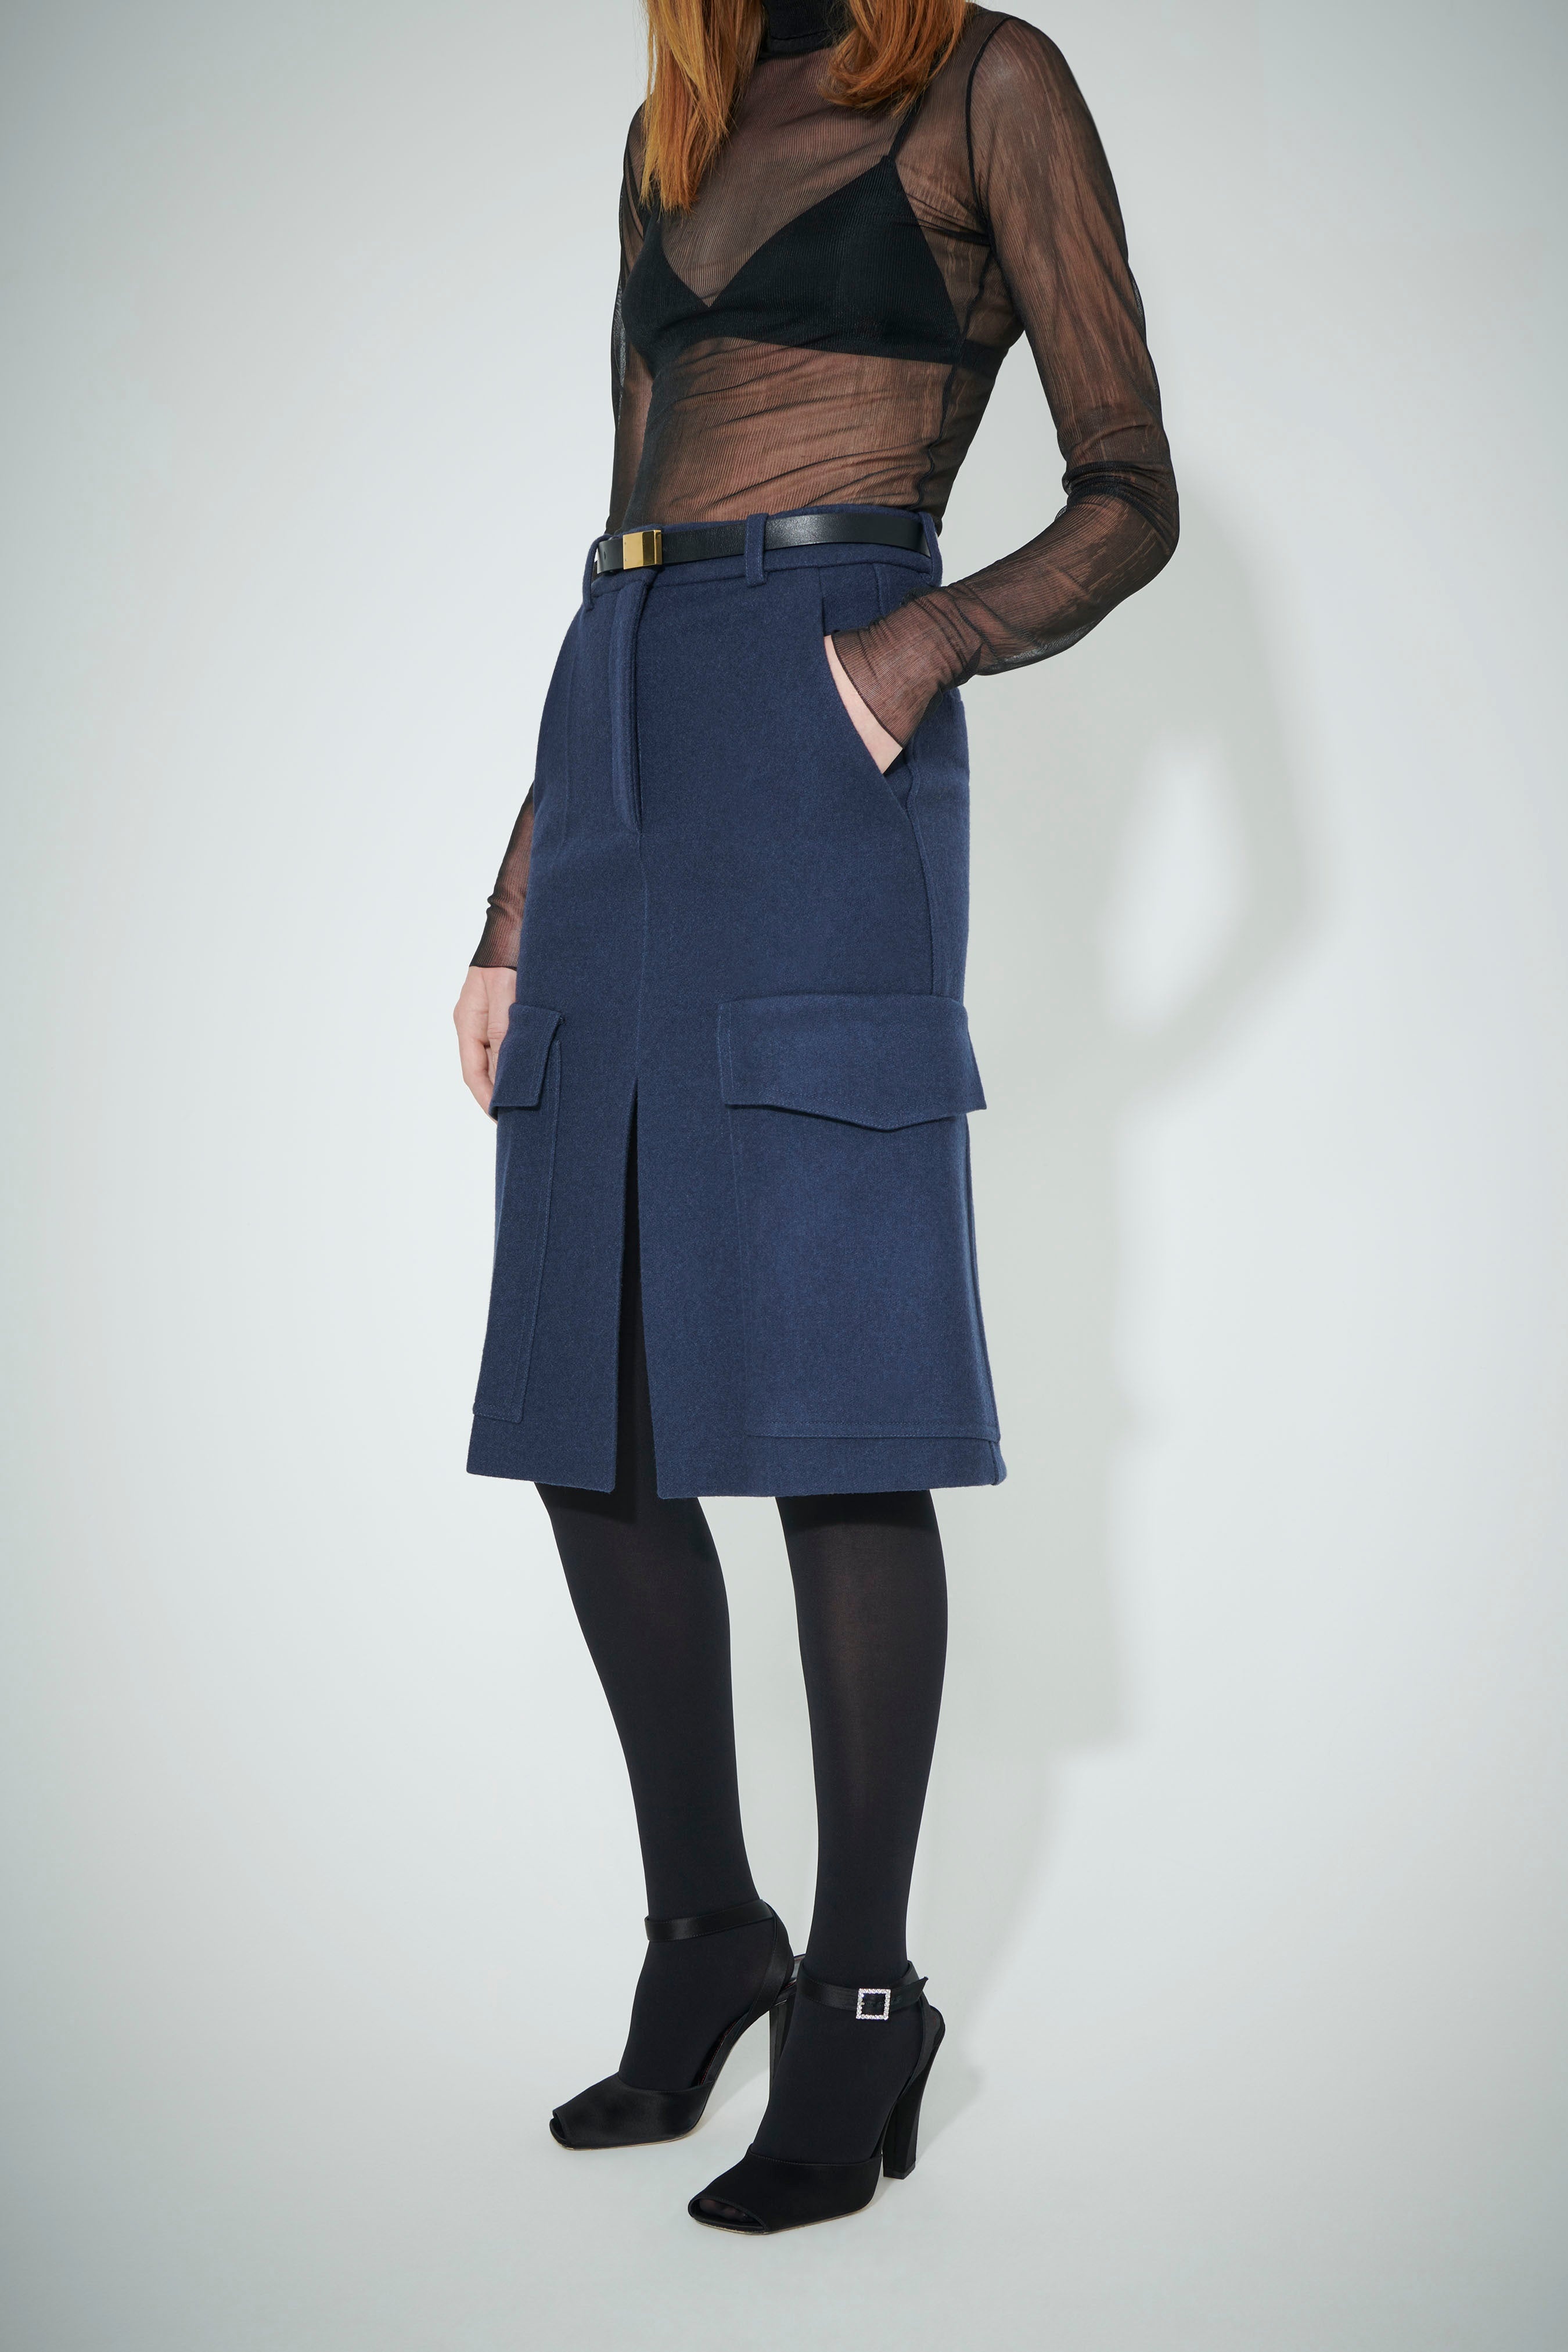 Tailored Utility Skirt in Steel Blue - 3